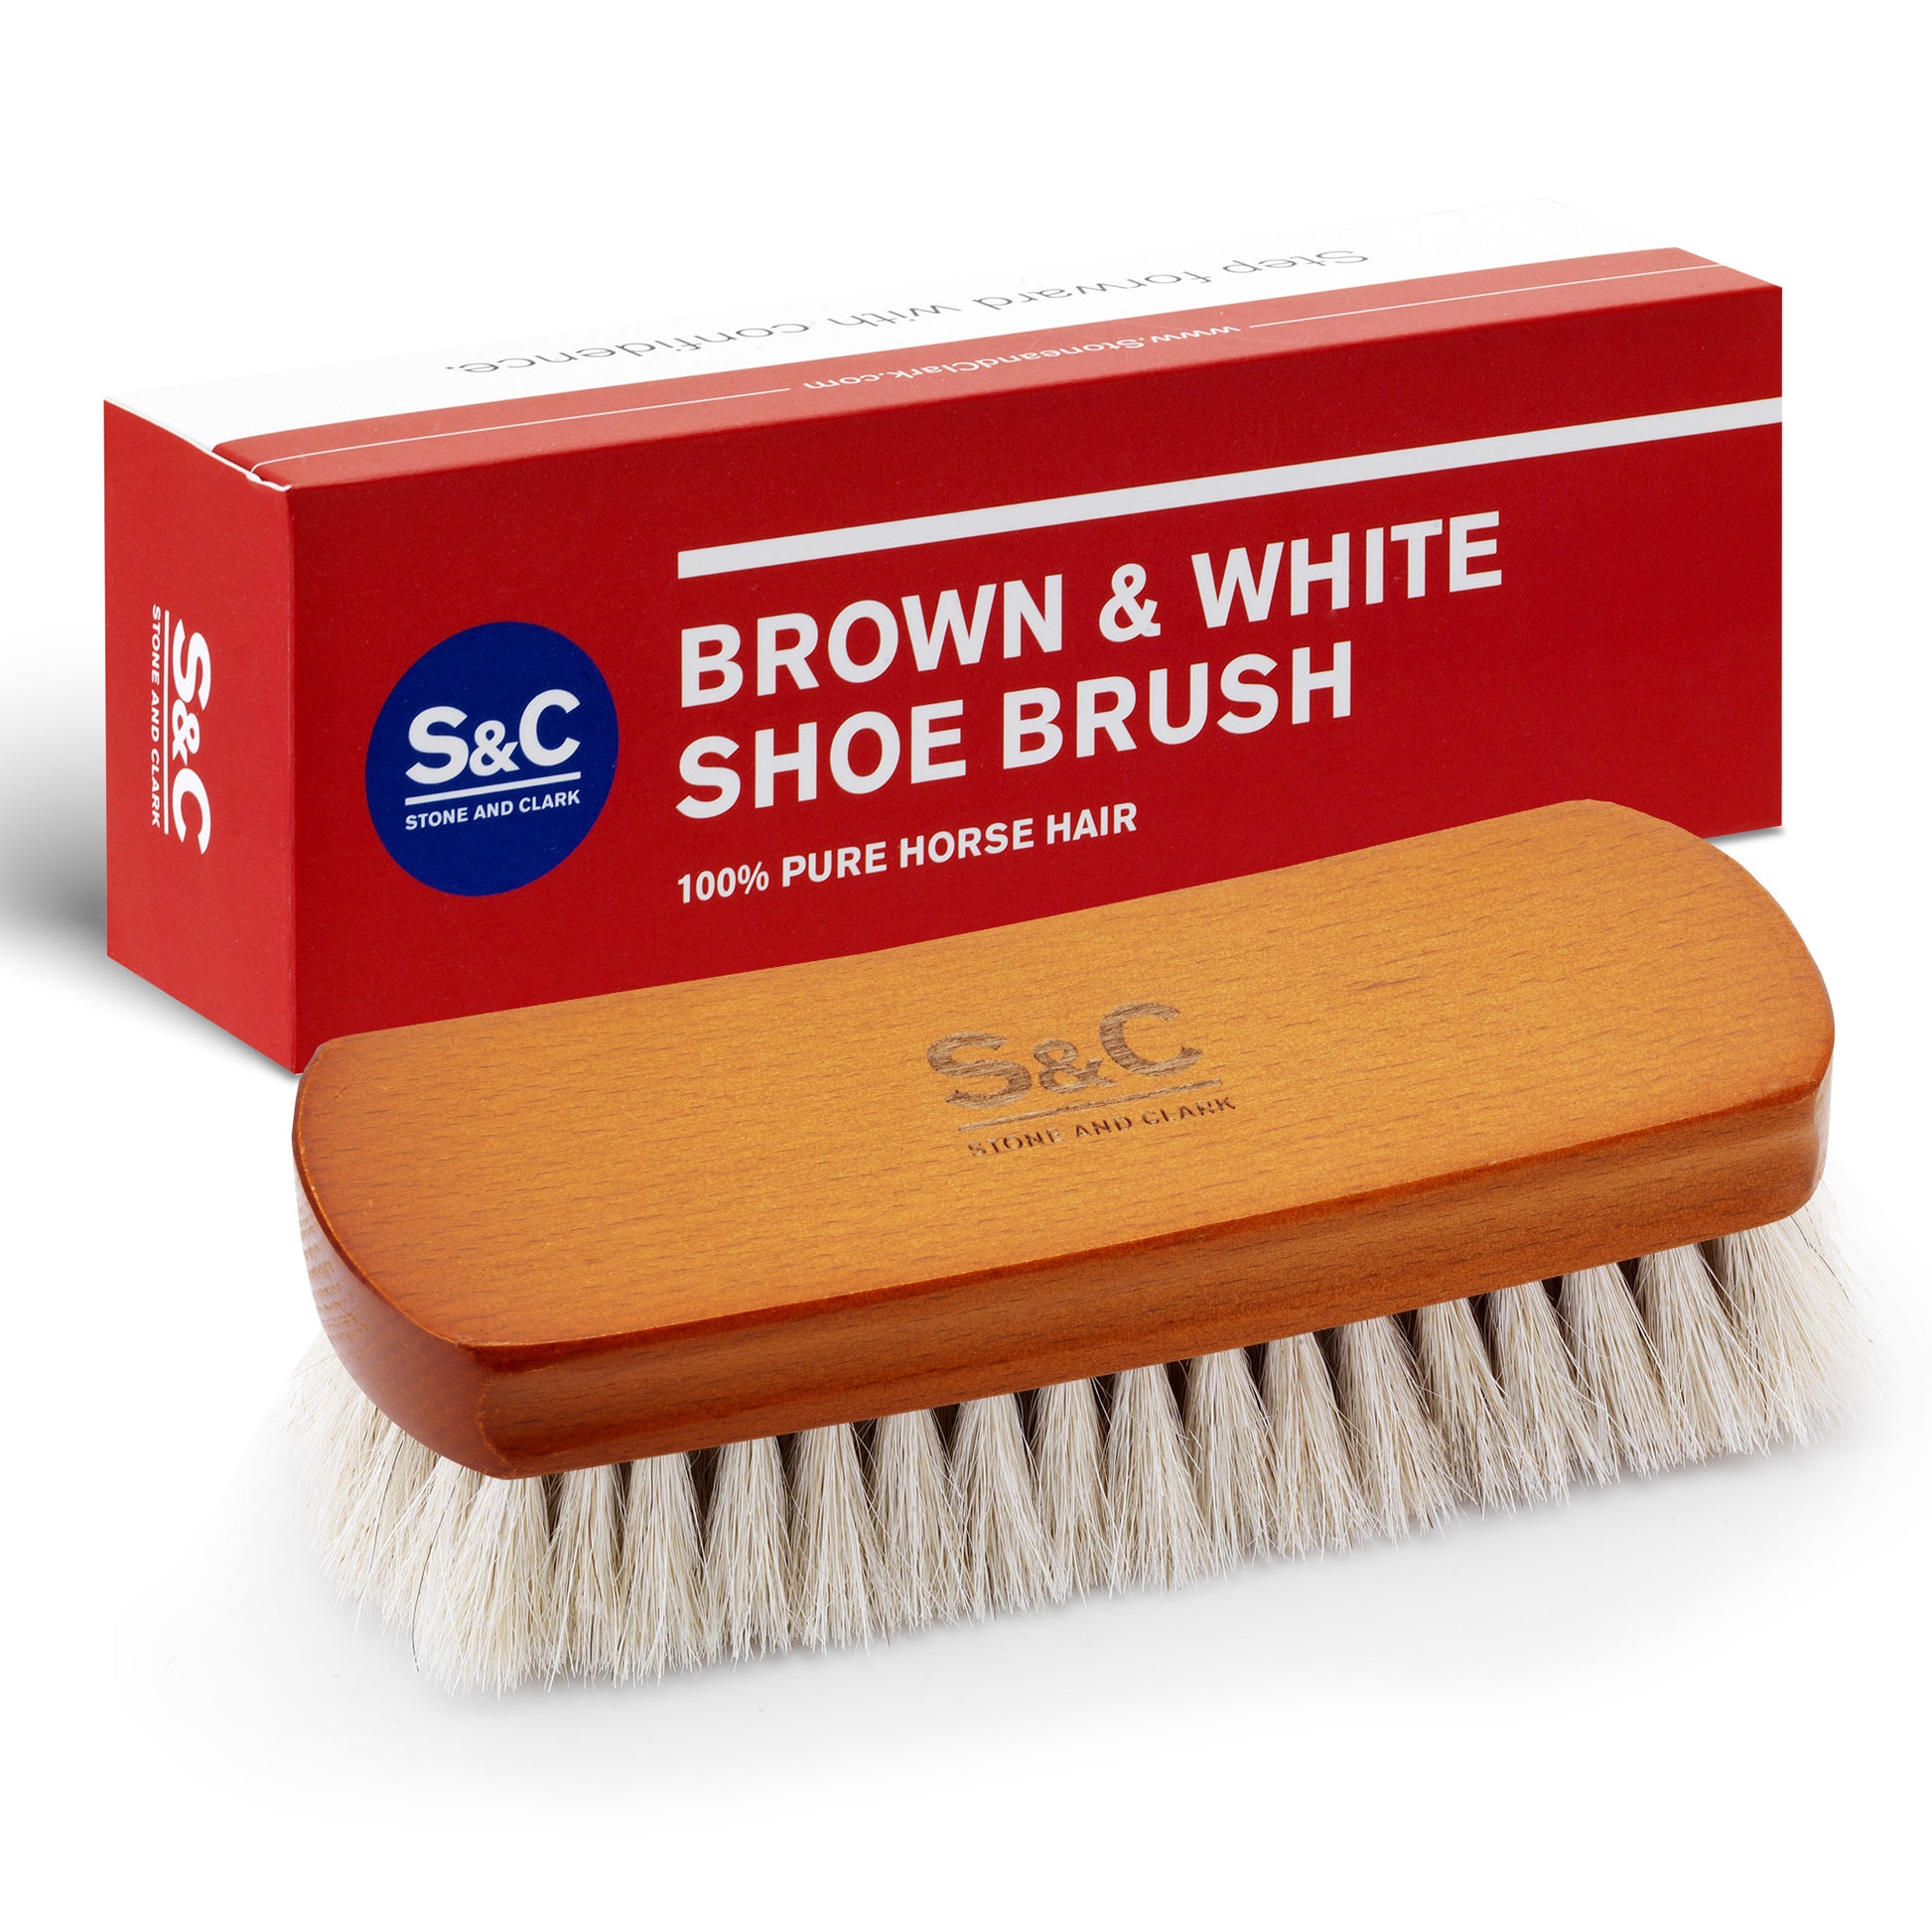 Premium White Horsehair Brush - Horse Hair Brushes for Cleaning, Polishing  & Buffing Leather Shoes - Shoe Polish Brush w/Soft Bristles, Comfy Grip -  Shoe Brushe… in 2023